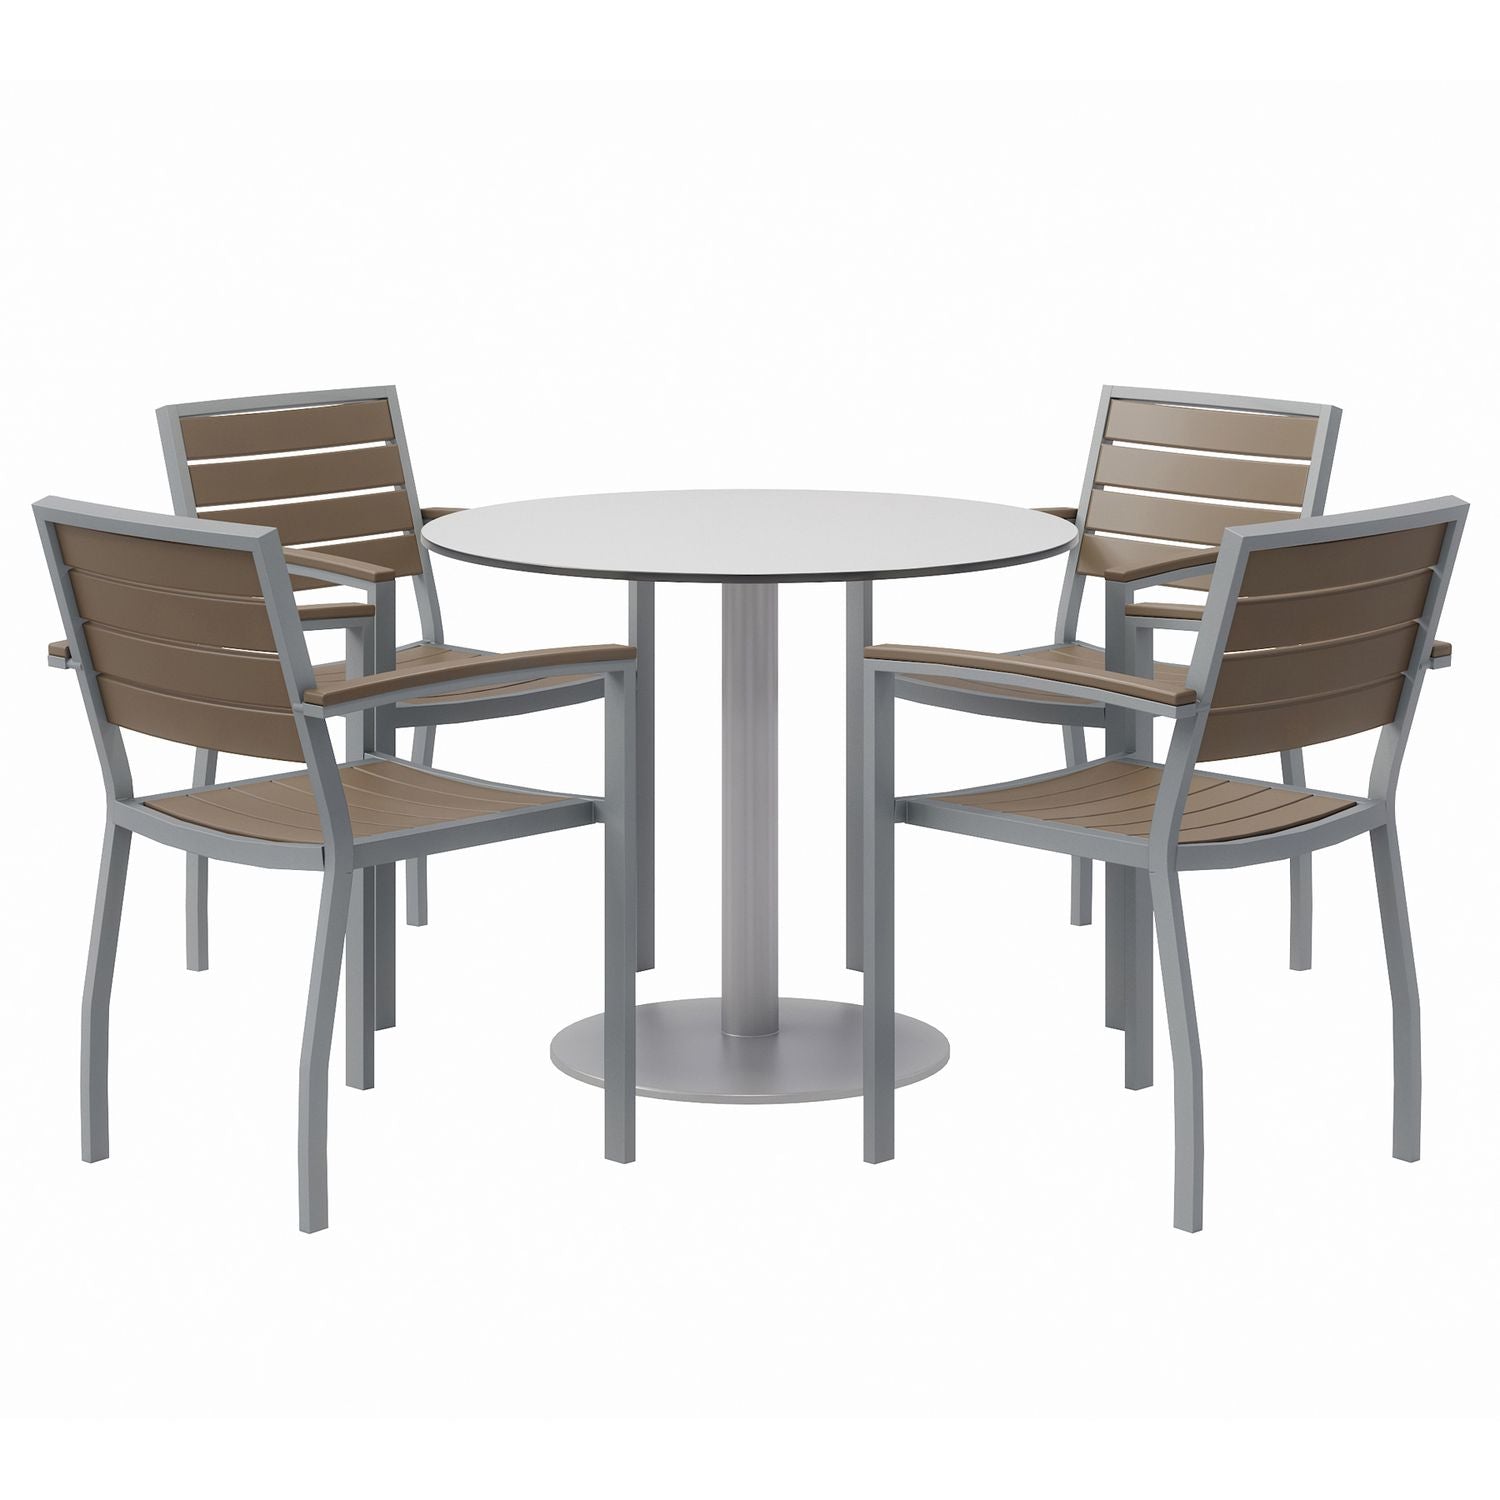 eveleen-outdoor-patio-table-4-mocha-powder-coated-polymer-chairs-round-36-dia-x-29h-fashion-gray-ships-in-4-6-bus-days_kfi840031918482 - 1